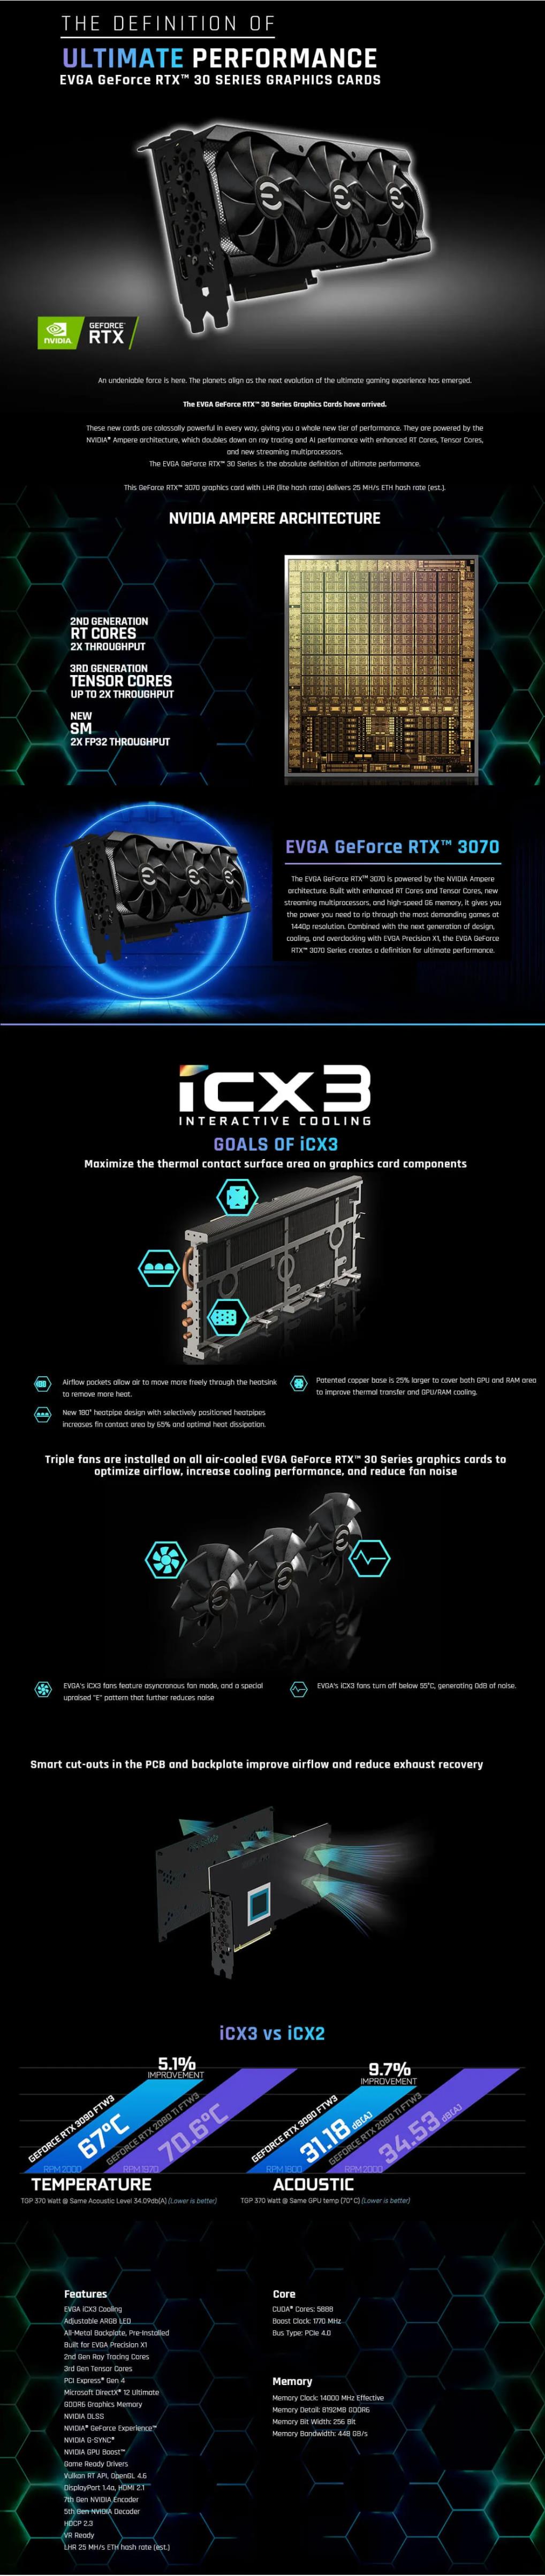 A large marketing image providing additional information about the product EVGA GeForce RTX 3070 XC3 ULTRA LHR 8GB GDDR6 - Additional alt info not provided